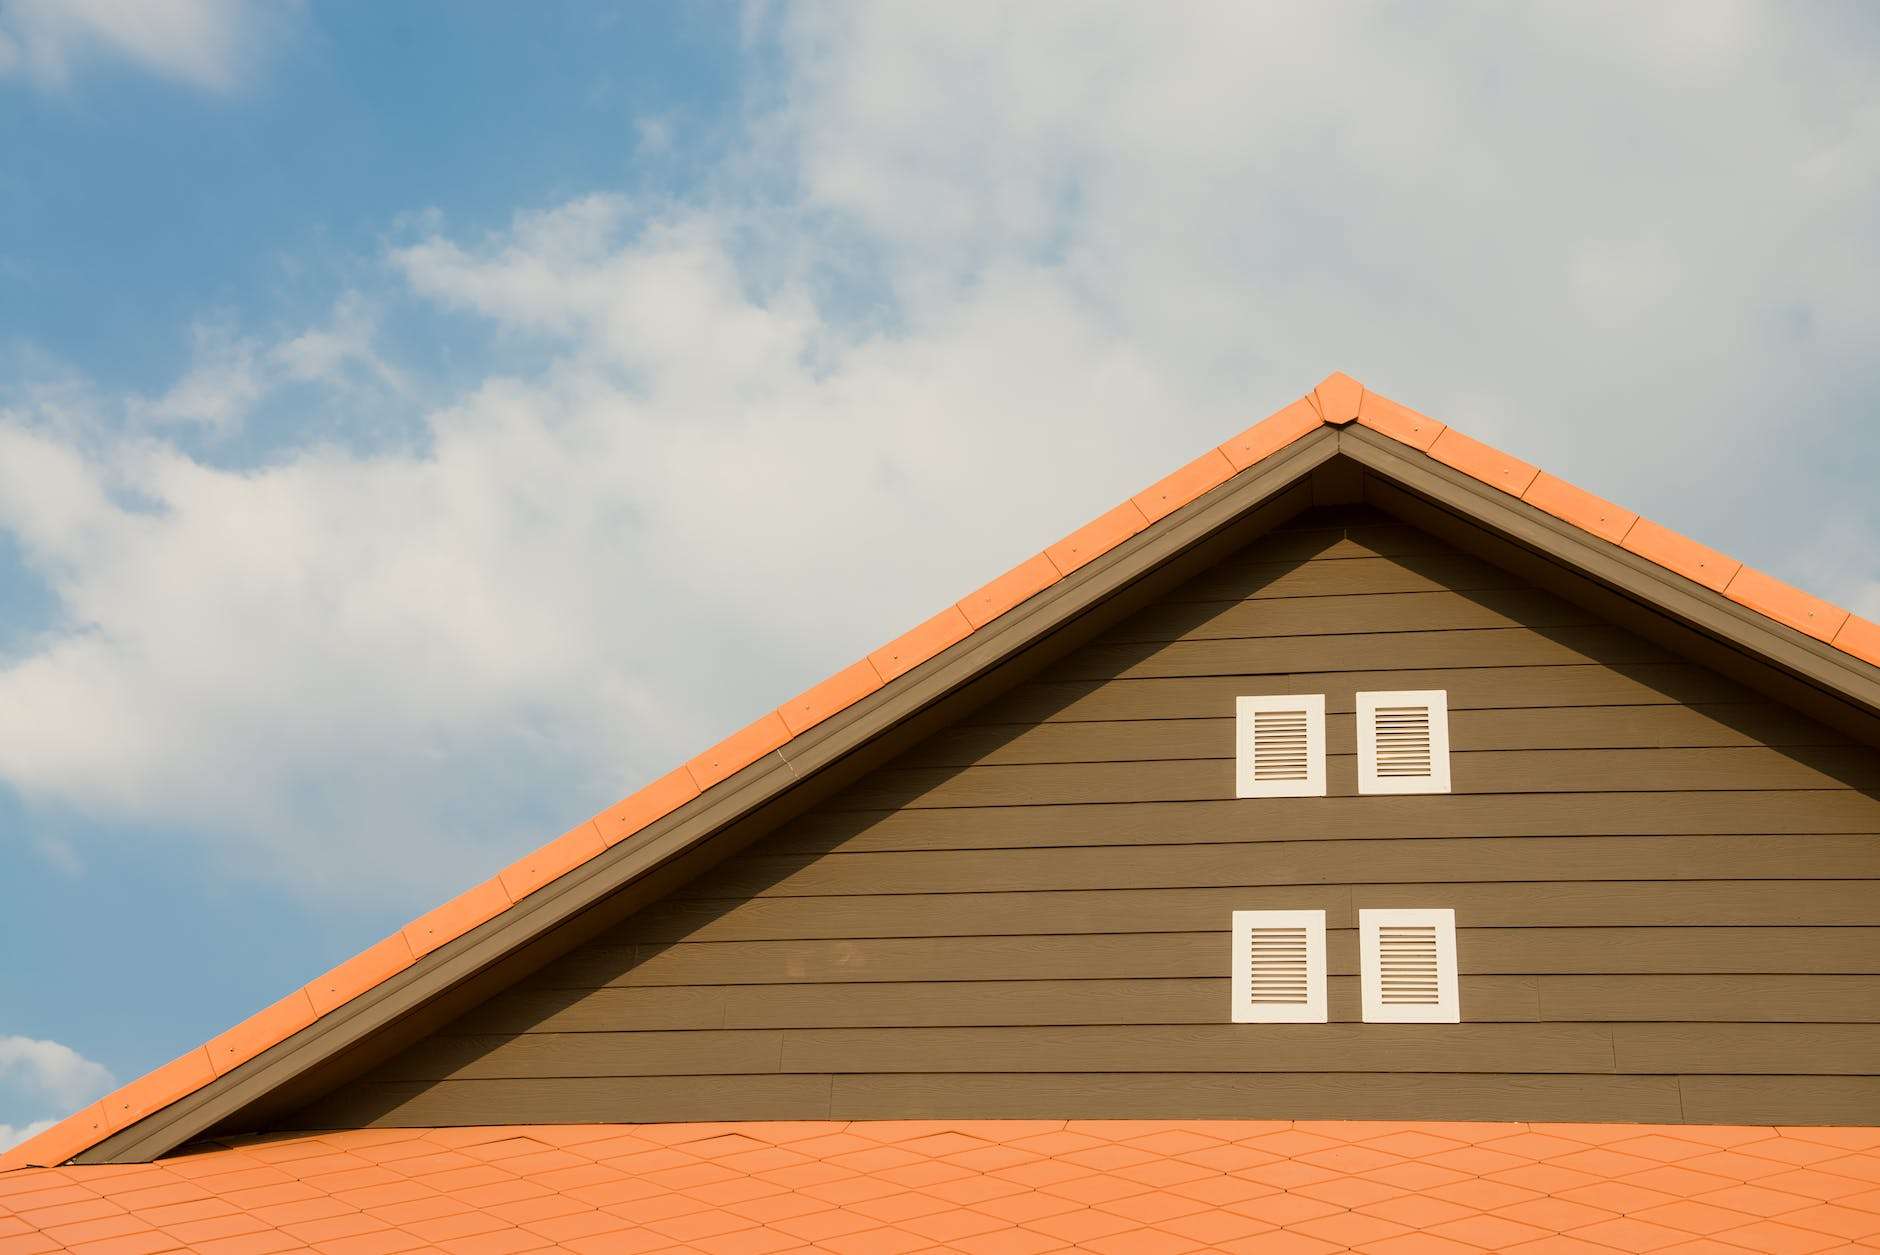 orange and gray painted roof under cloudy sky to illustrate rise in property values